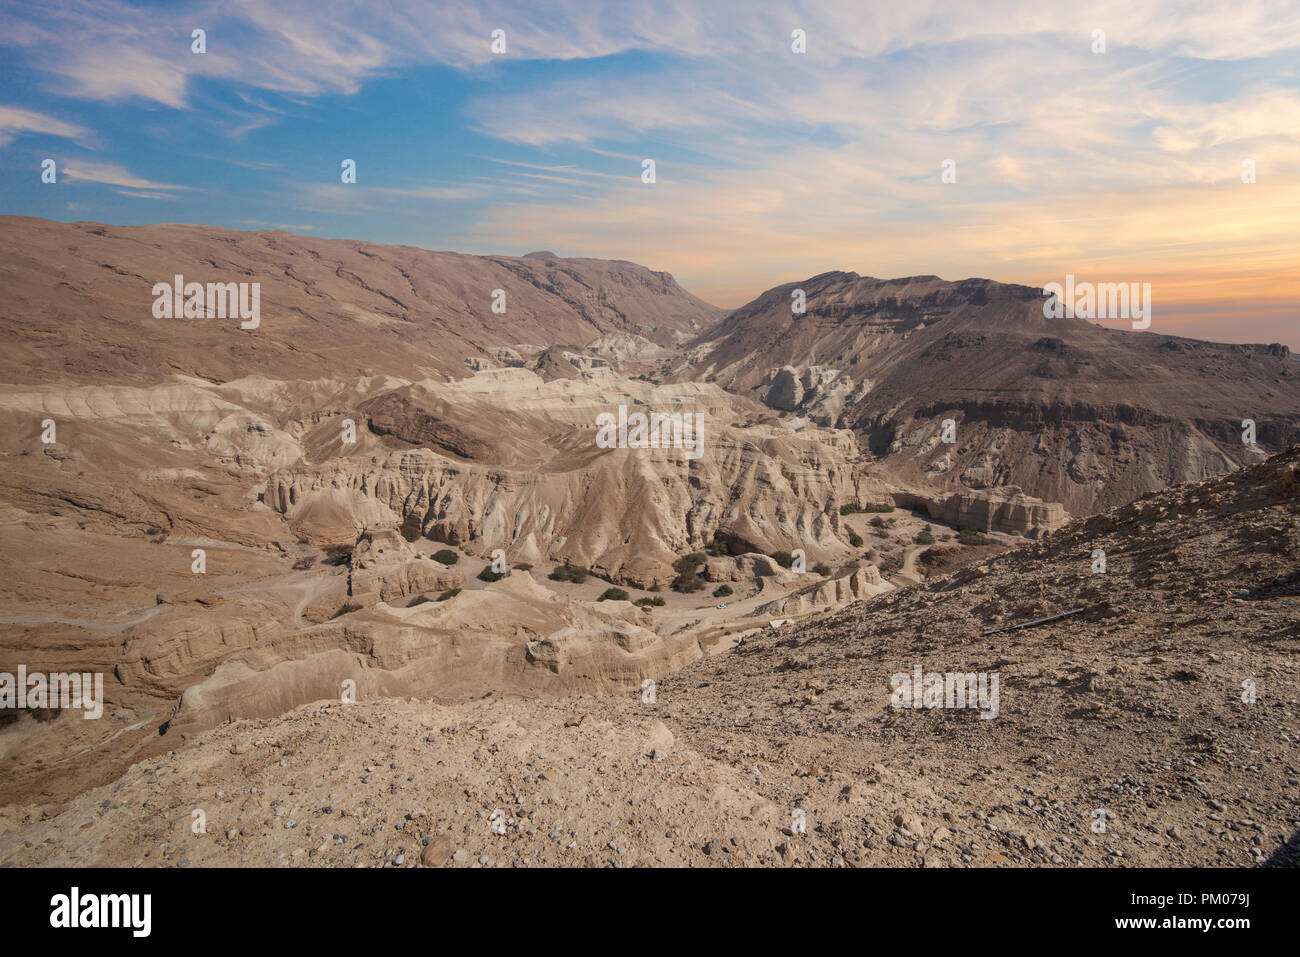 Amazing landscape of the Israelian desert on the way to the Dead Sea Stock Photo